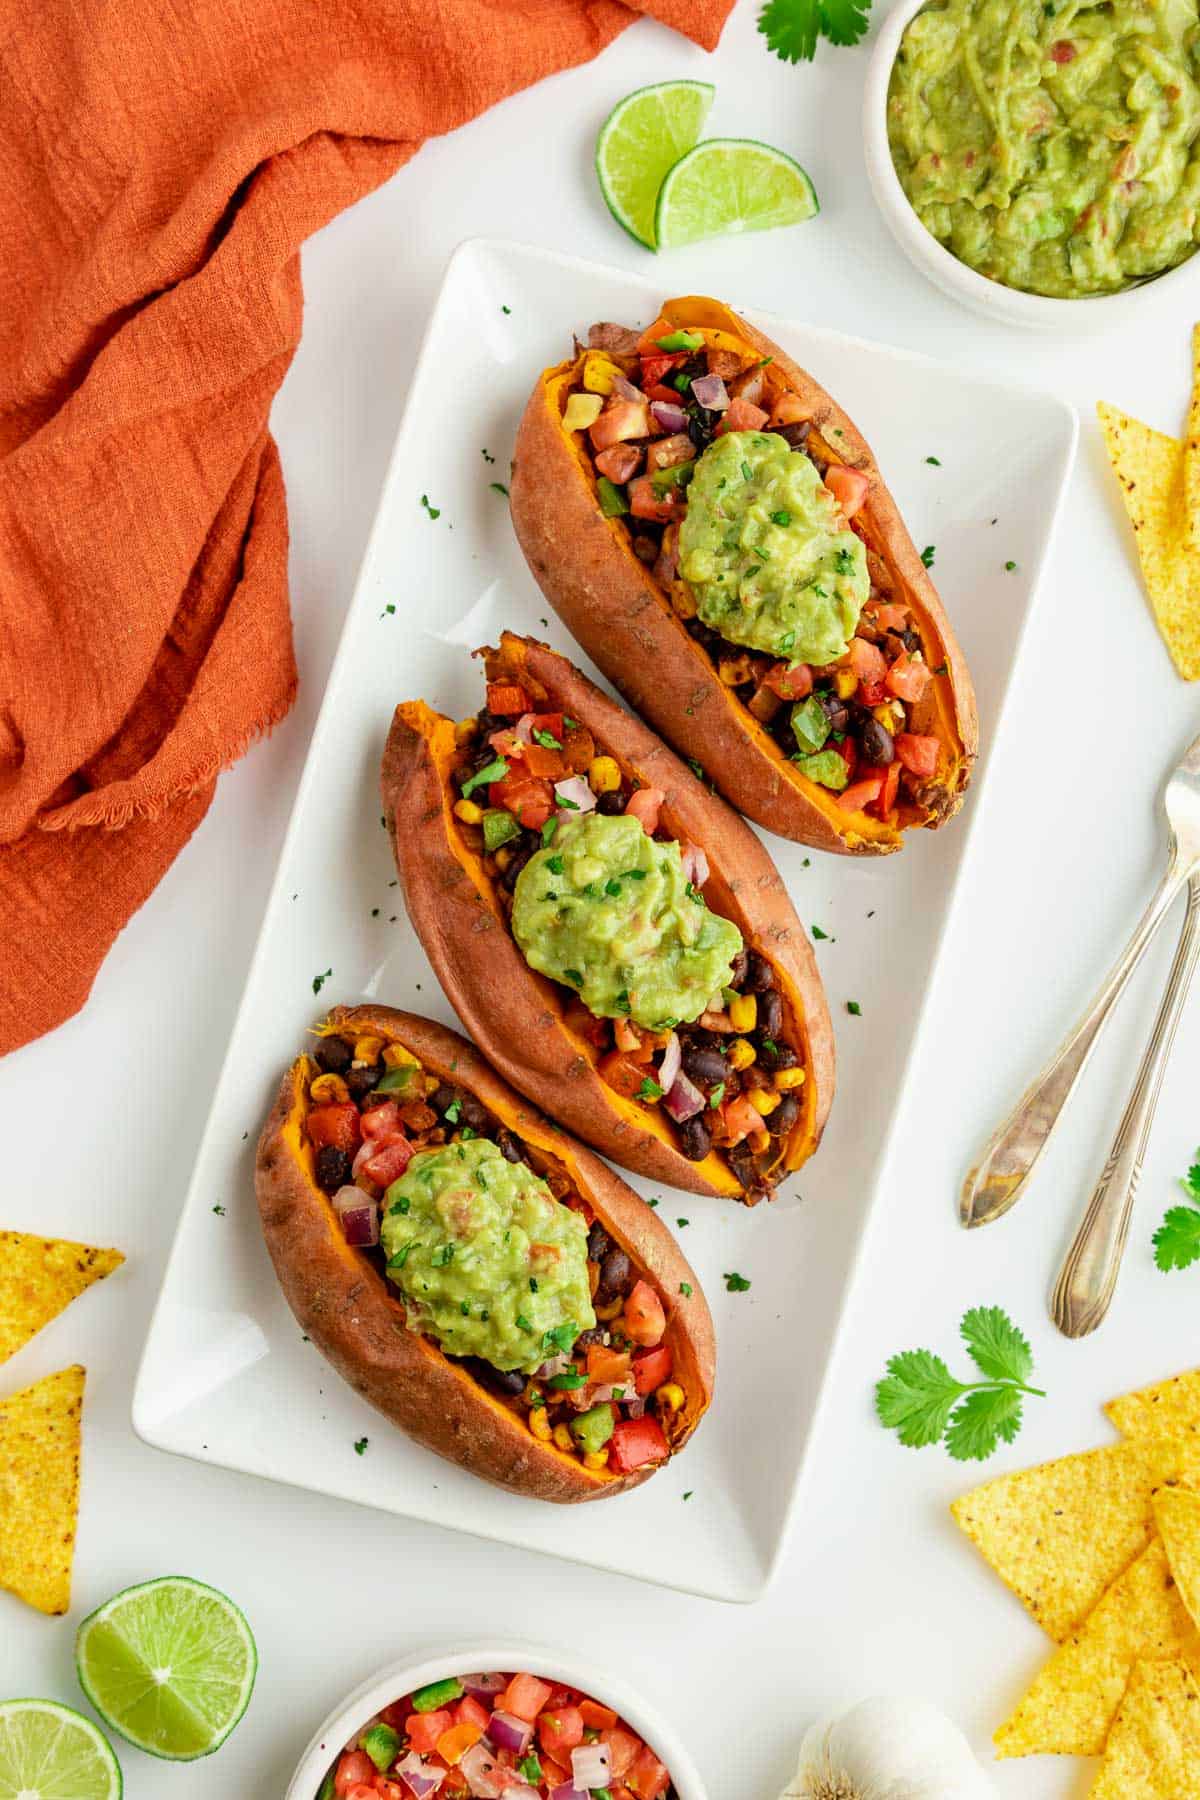 three mexican stuffed sweet potatoes on a white rectangular plate surrounded by corn tortilla chips, guacamole, limes, pico de gallo, and an orange linen napkin